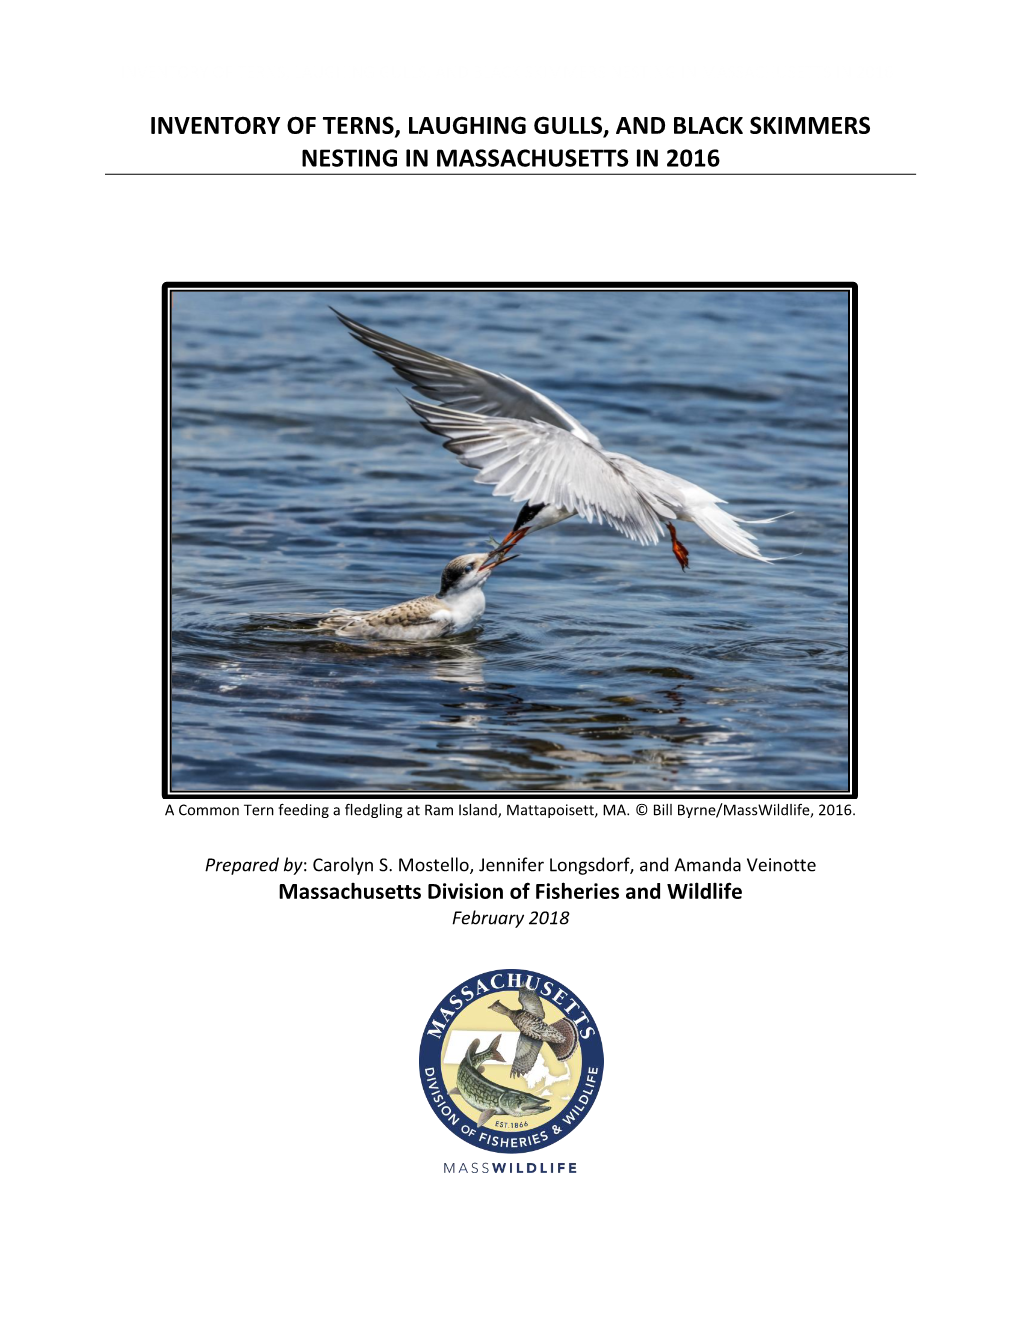 Inventory of Terns, Laughing Gulls, and Black Skimmers Nesting in Massachusetts in 2016